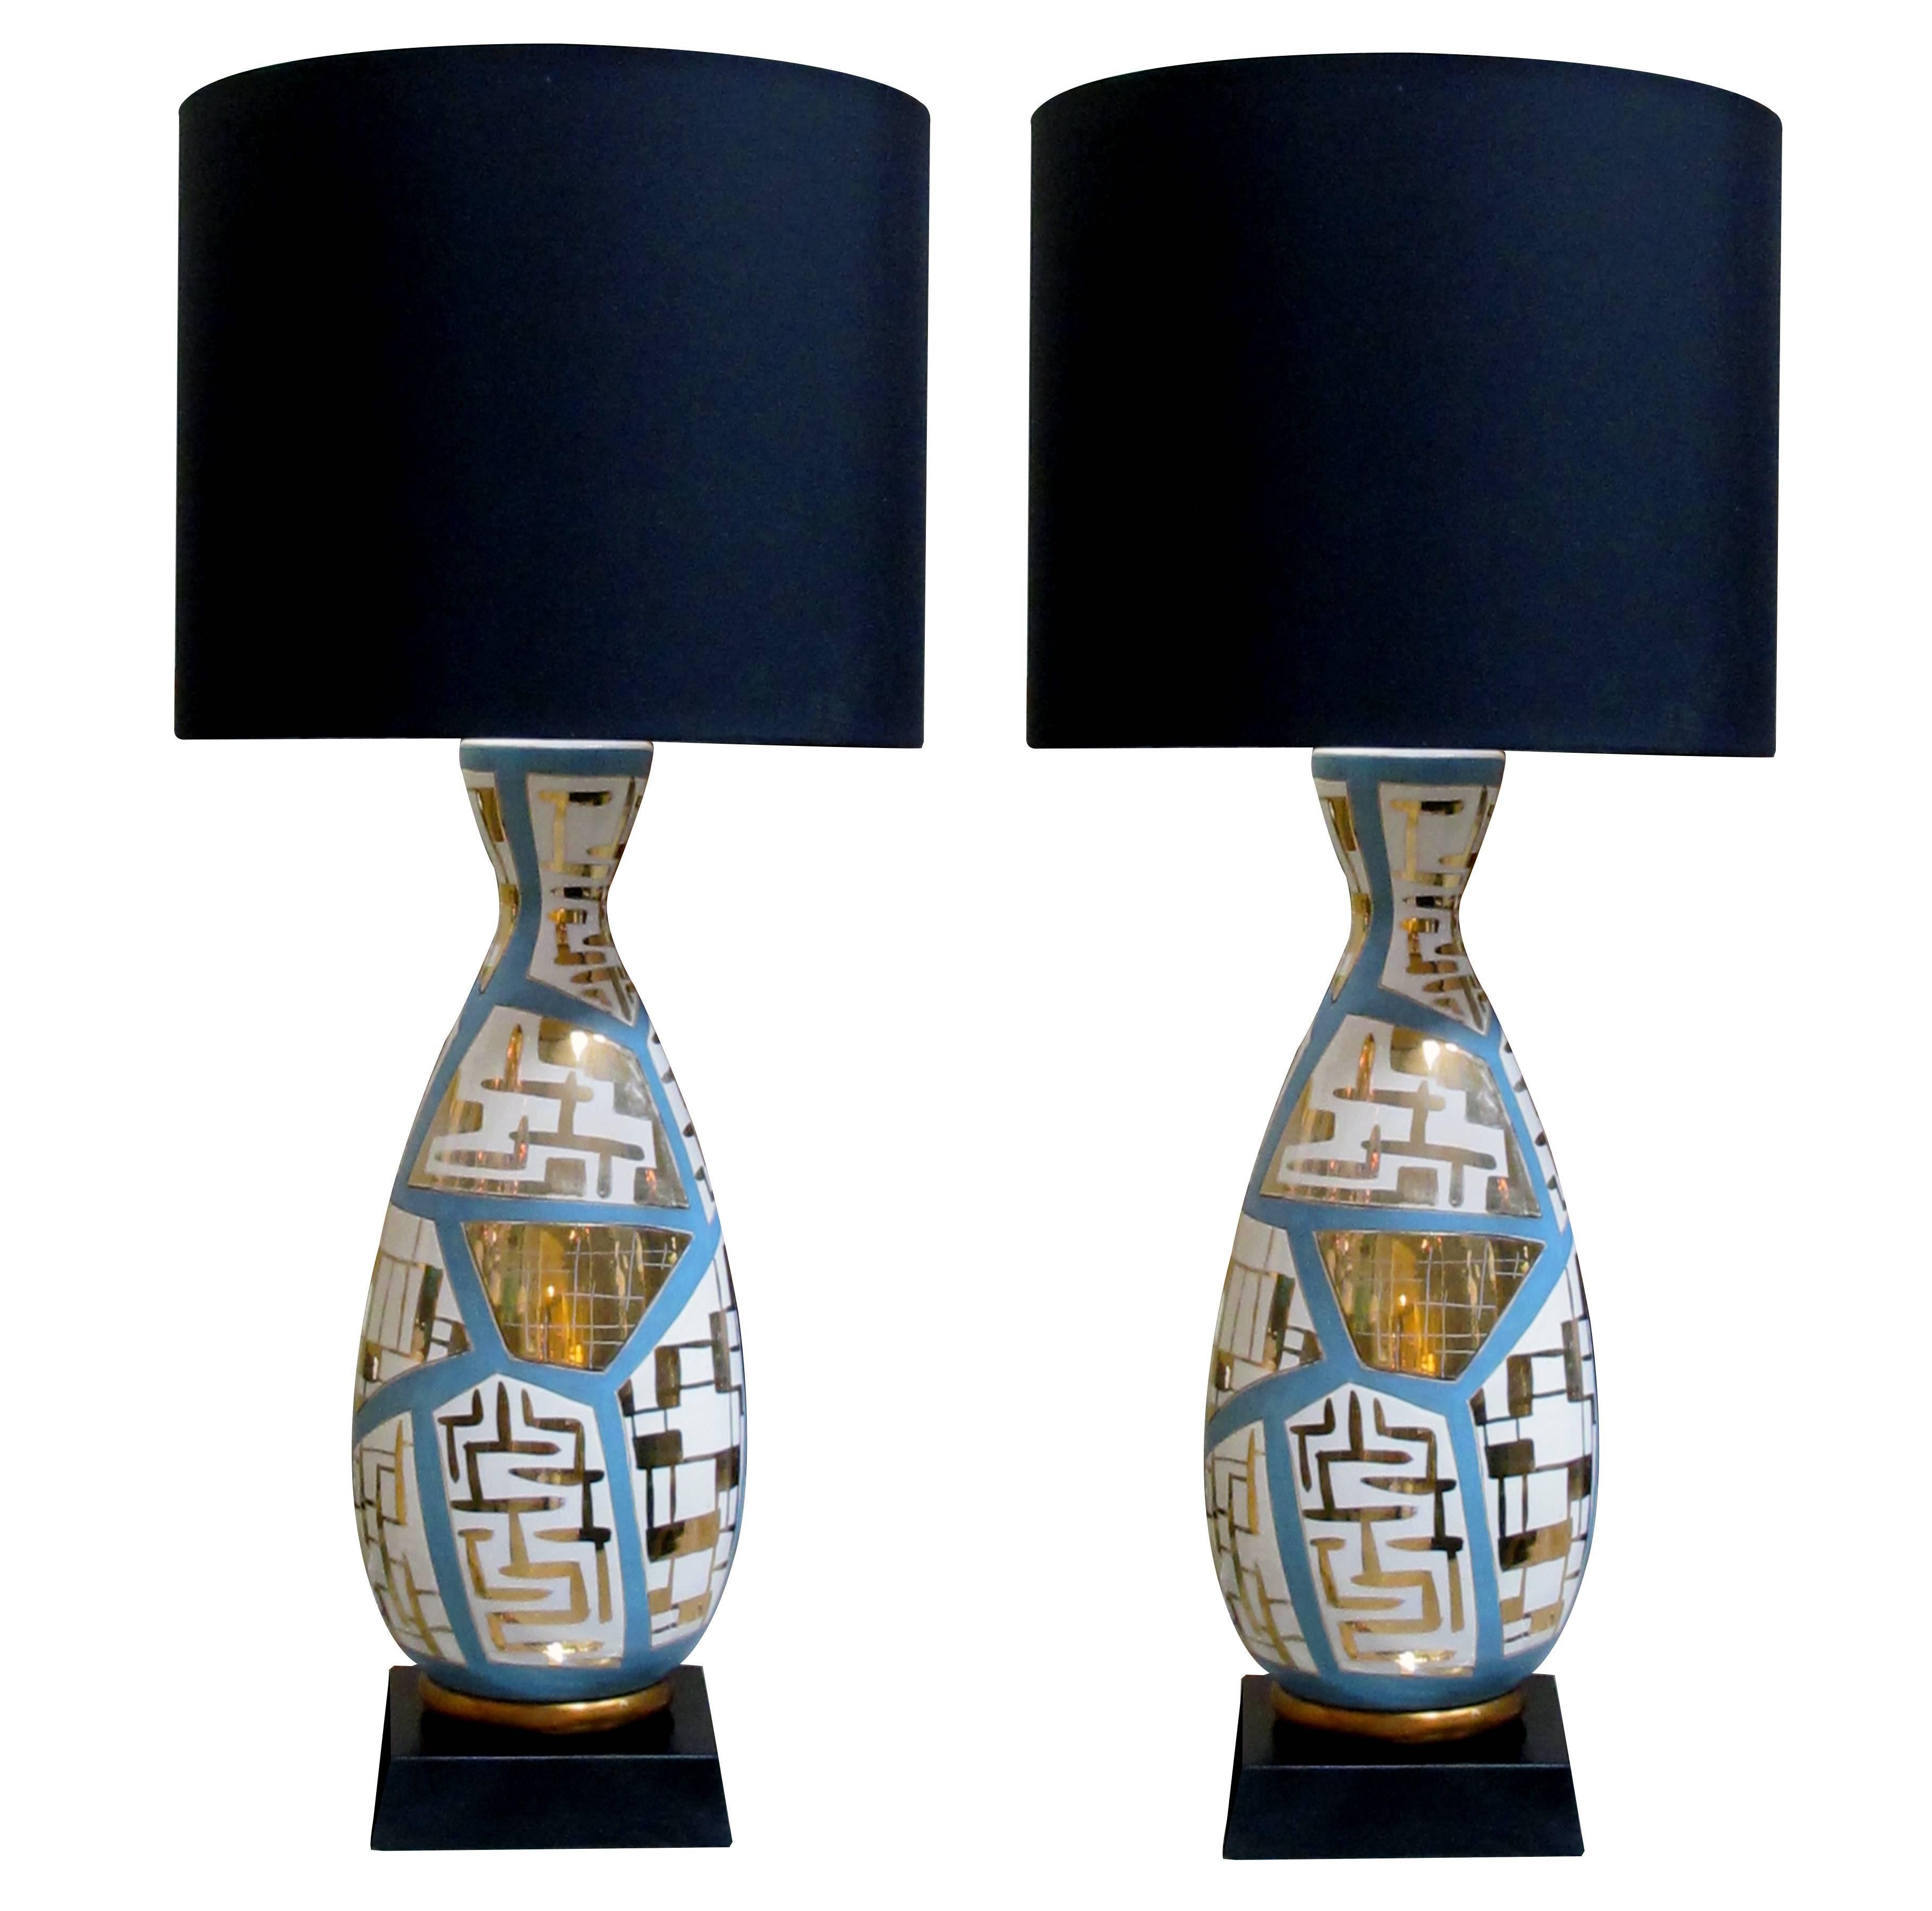 Striking & Tall Pair of Italian Bottle-Form Lamps with Gilt Geometric Decoration